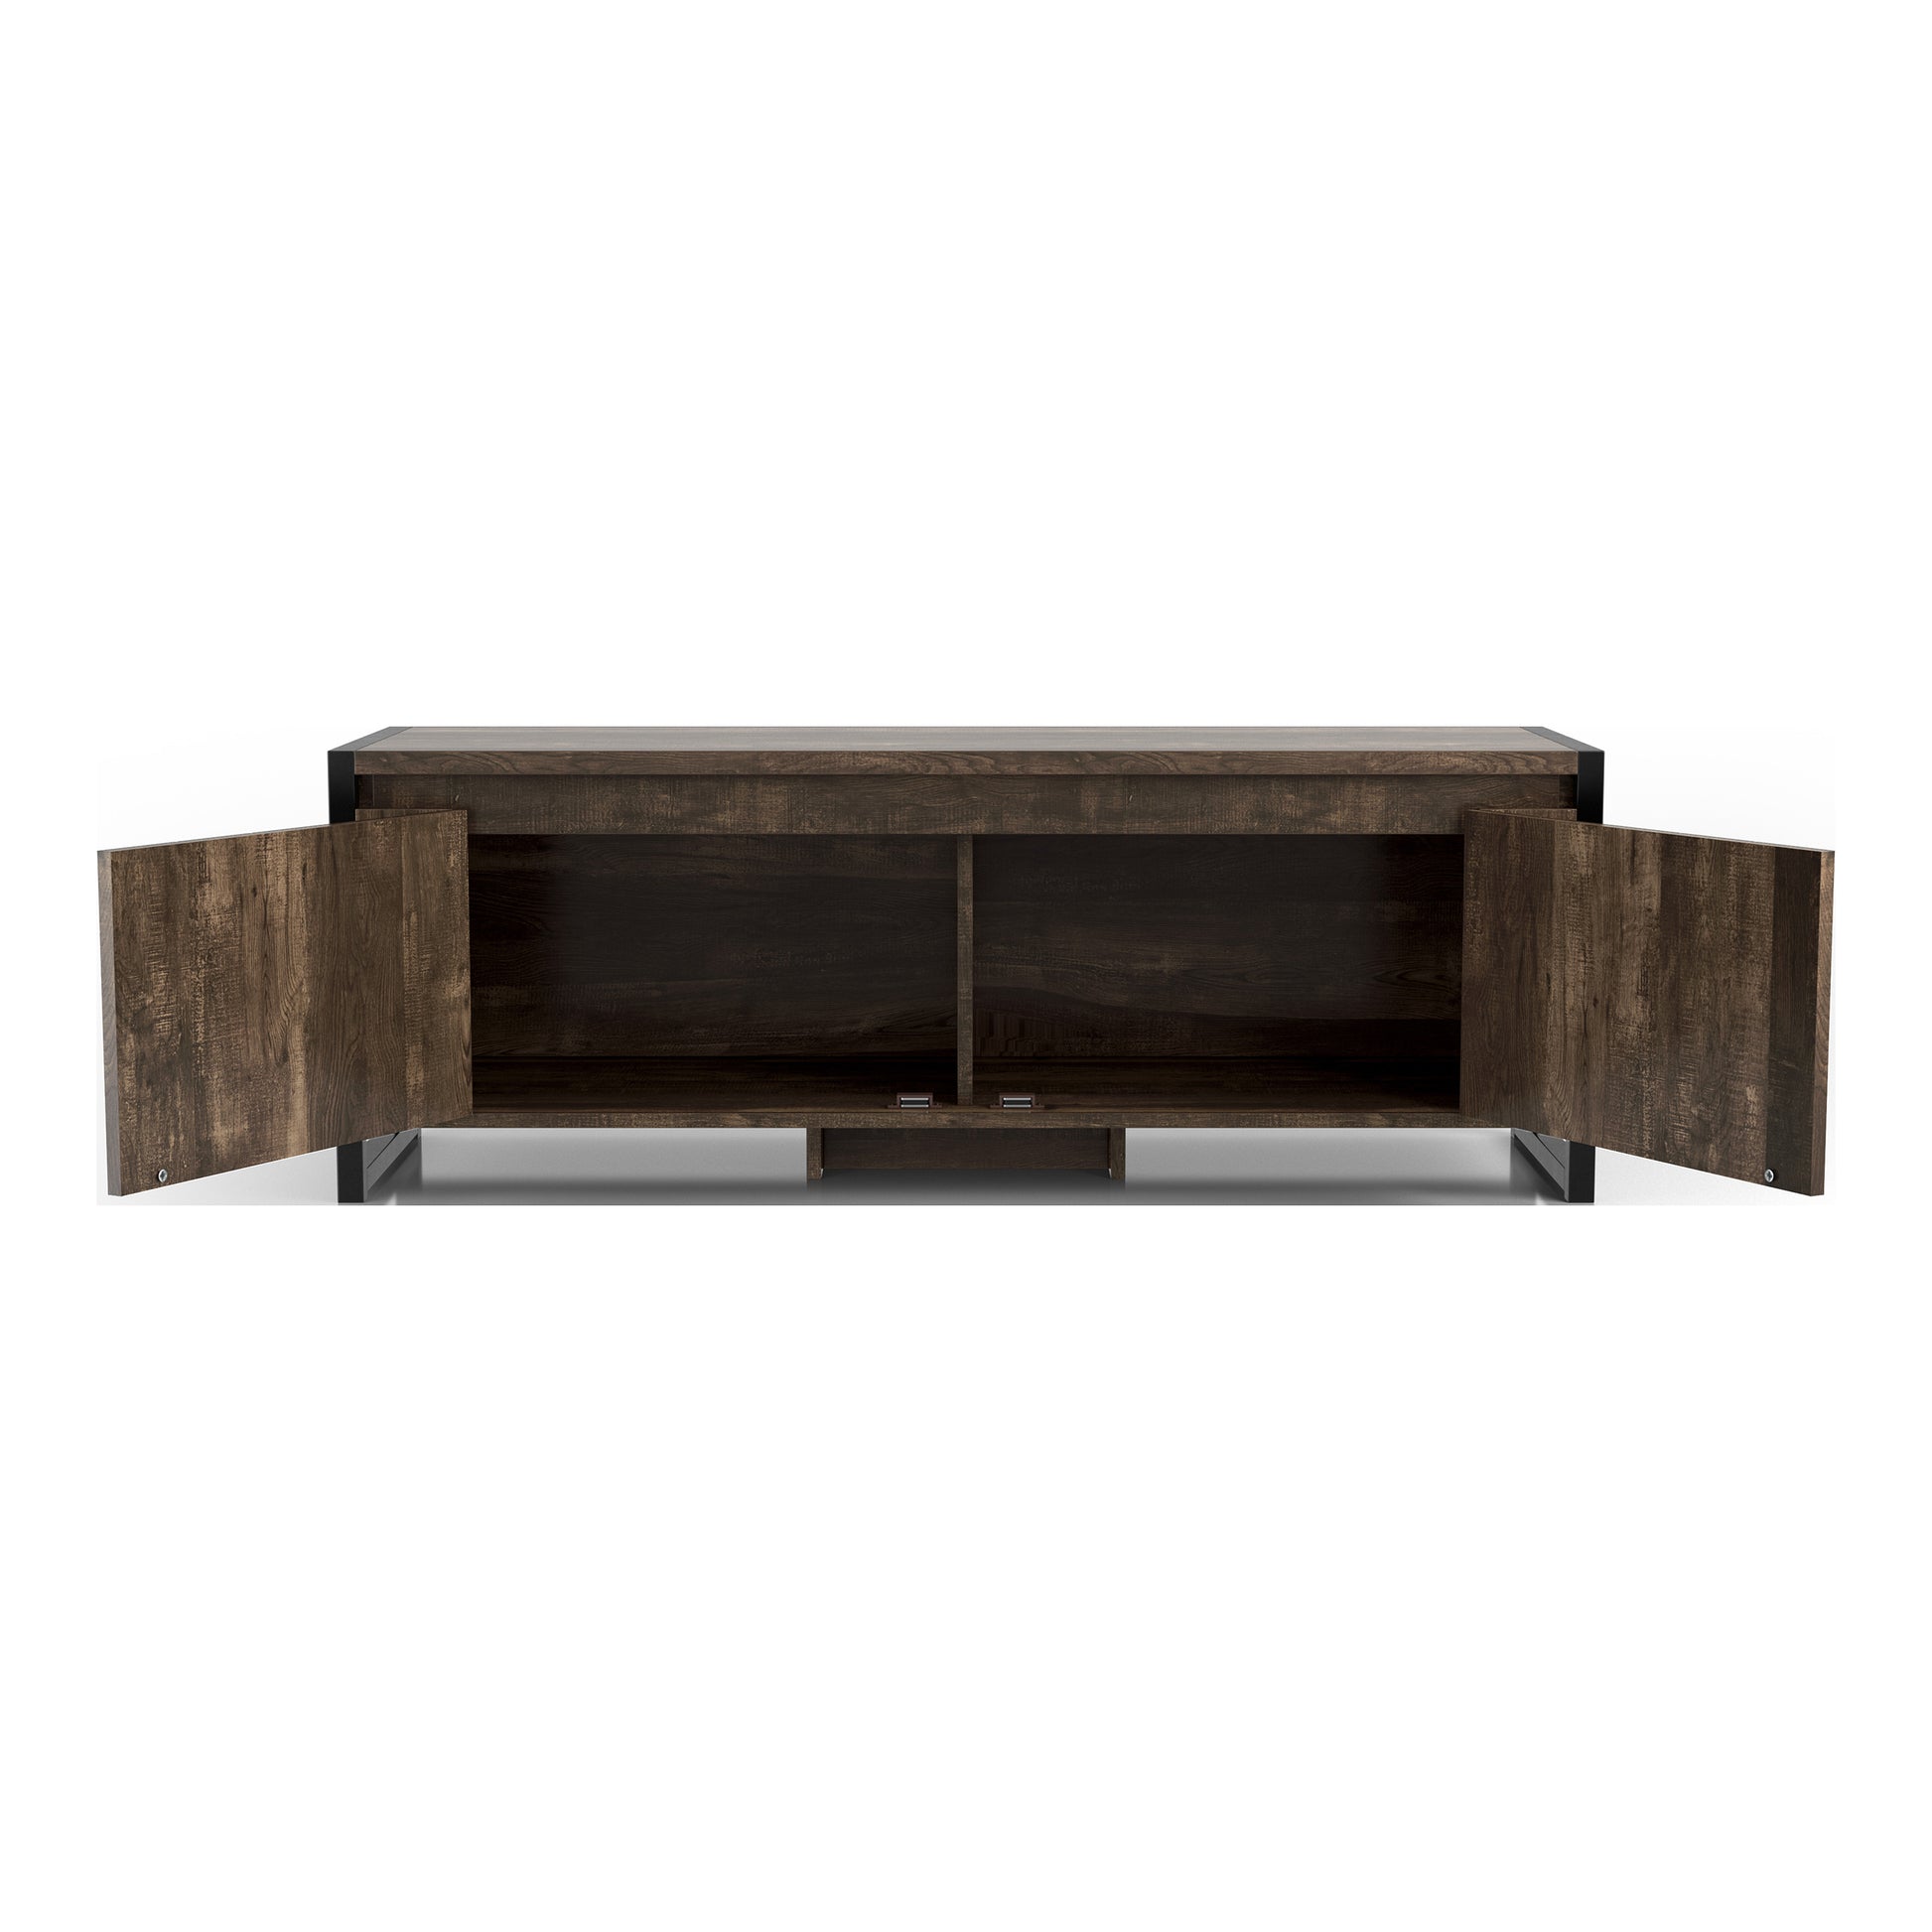 Front-facing industrial reclaimed oak two-door storage bench with both doors open on a white background